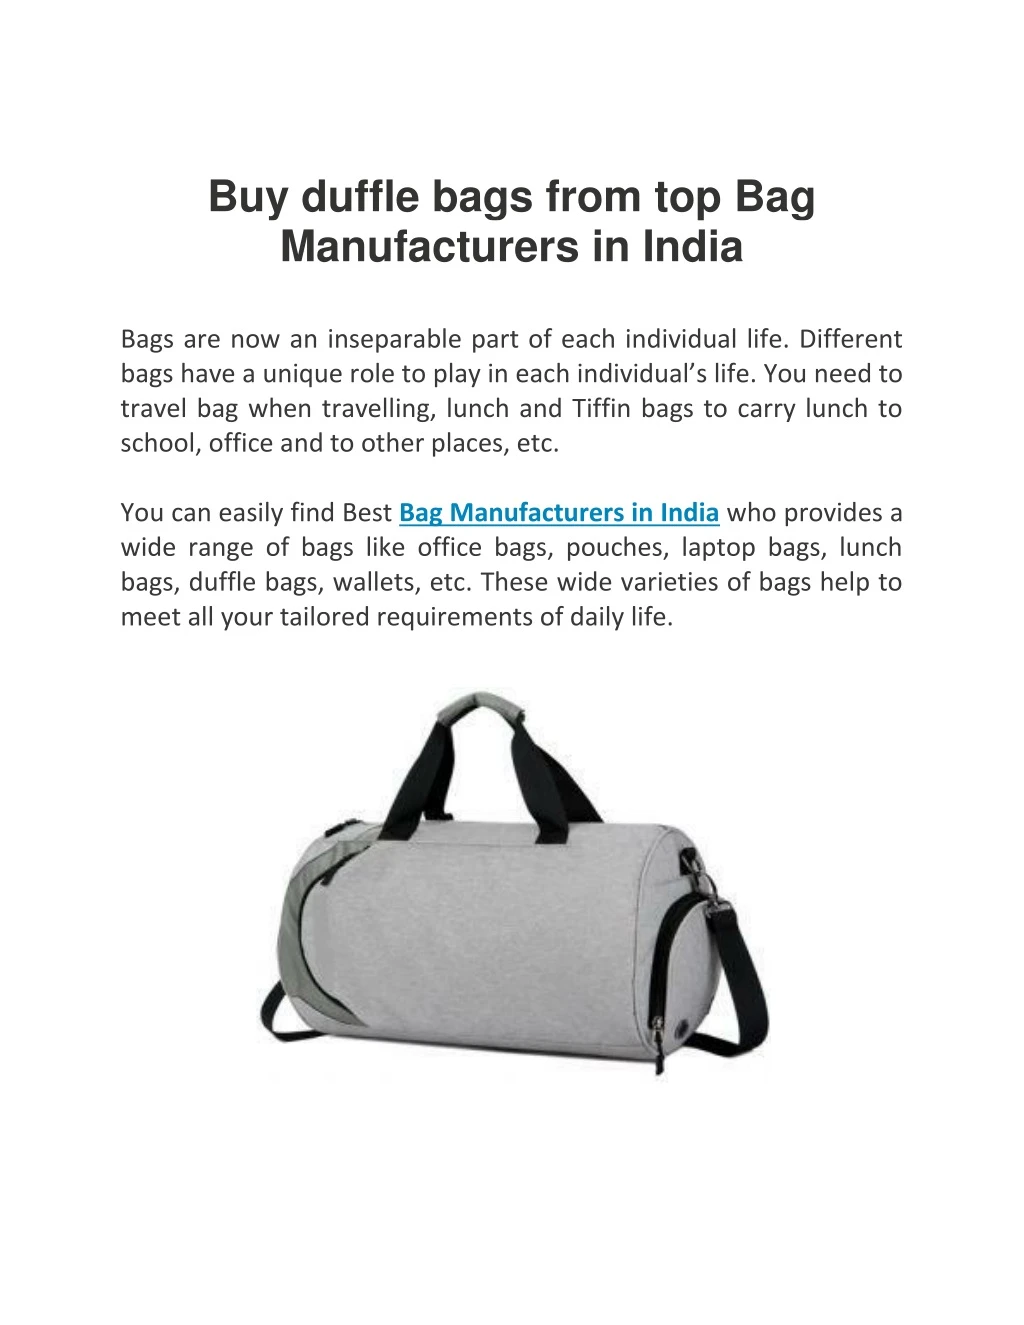 buy duffle bags from top bag manufacturers